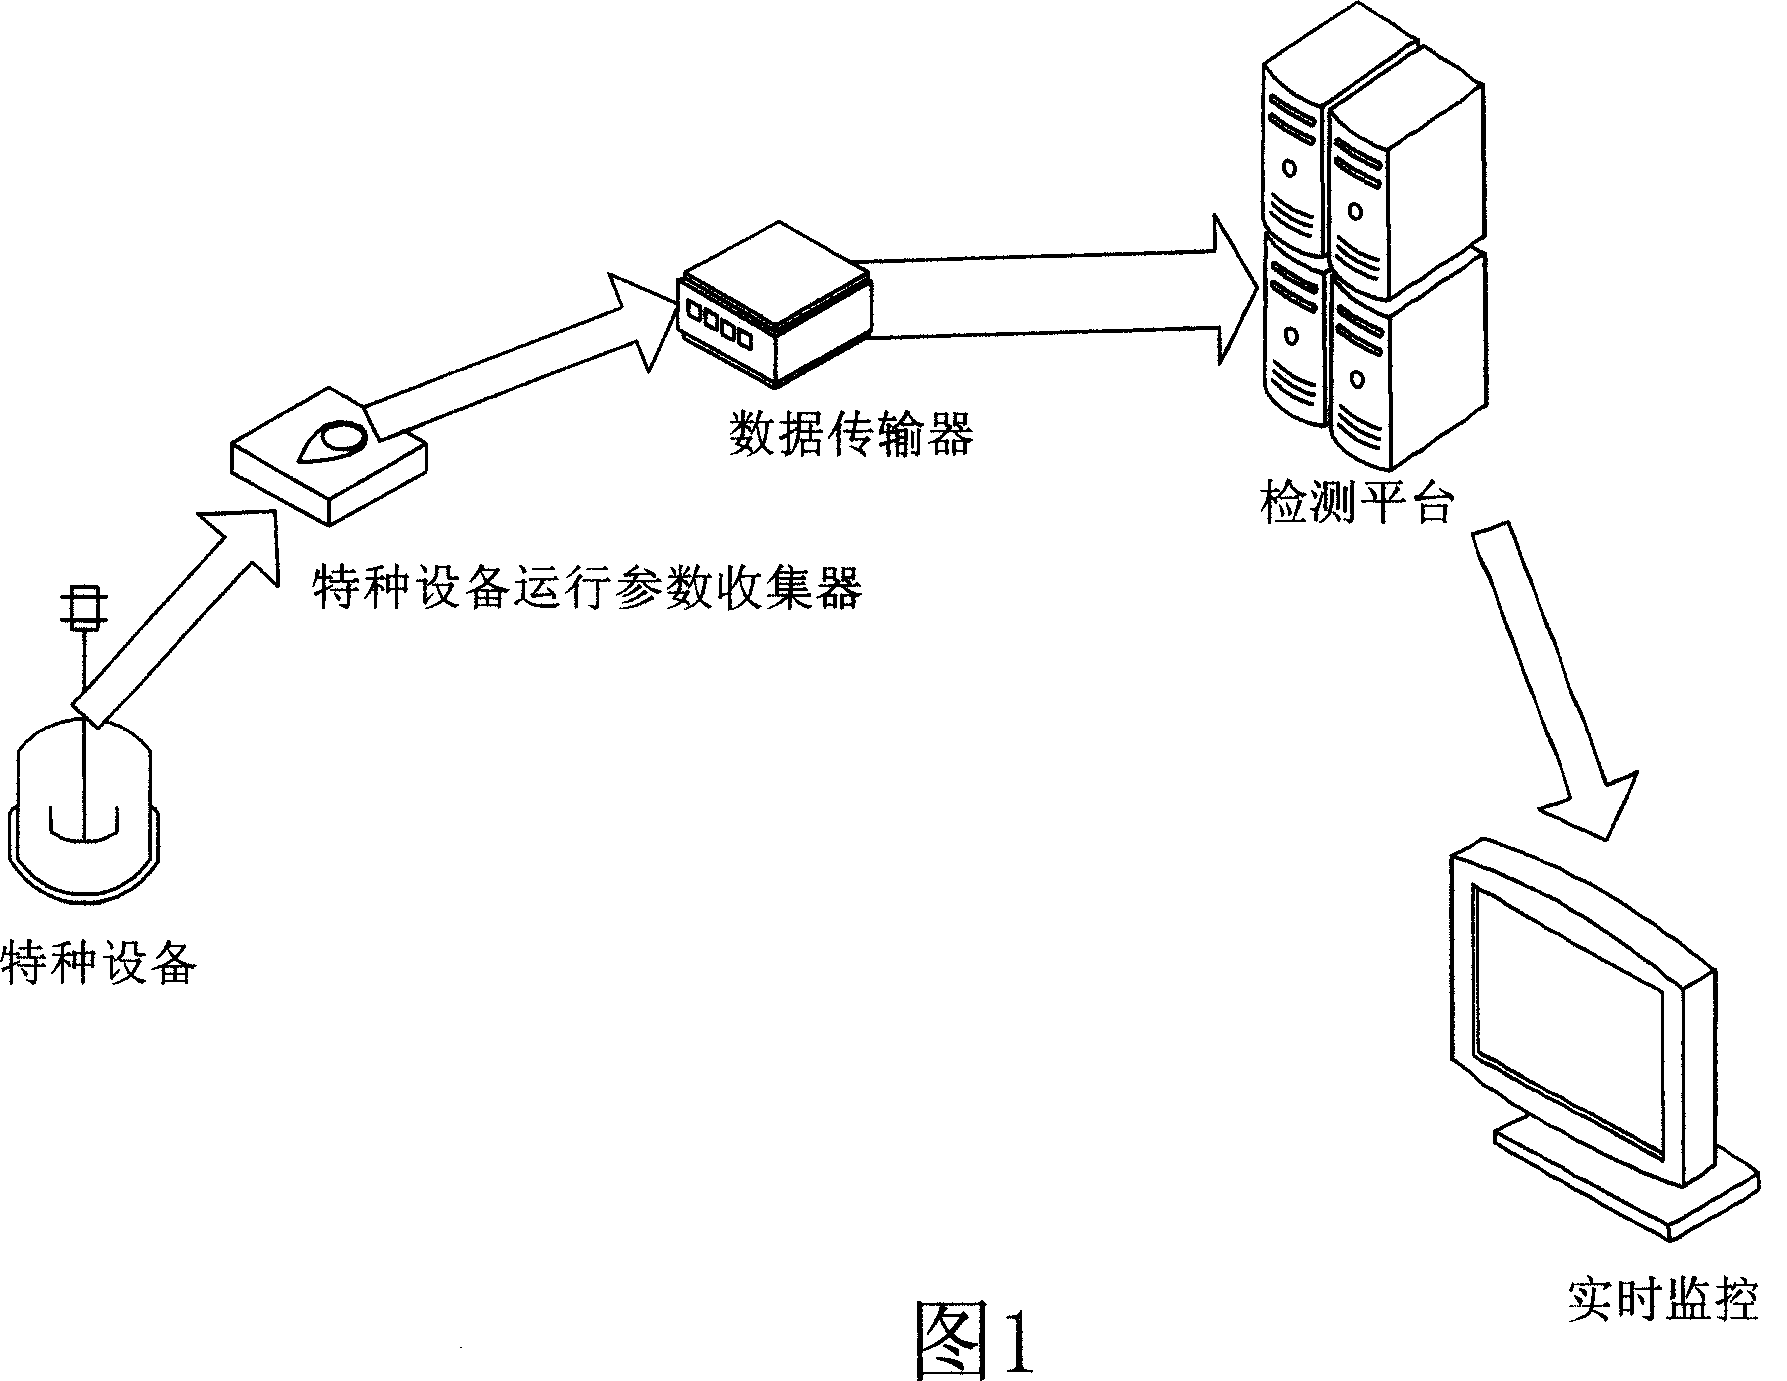 Operating, register, collecting and analysis system of remote special apparatus